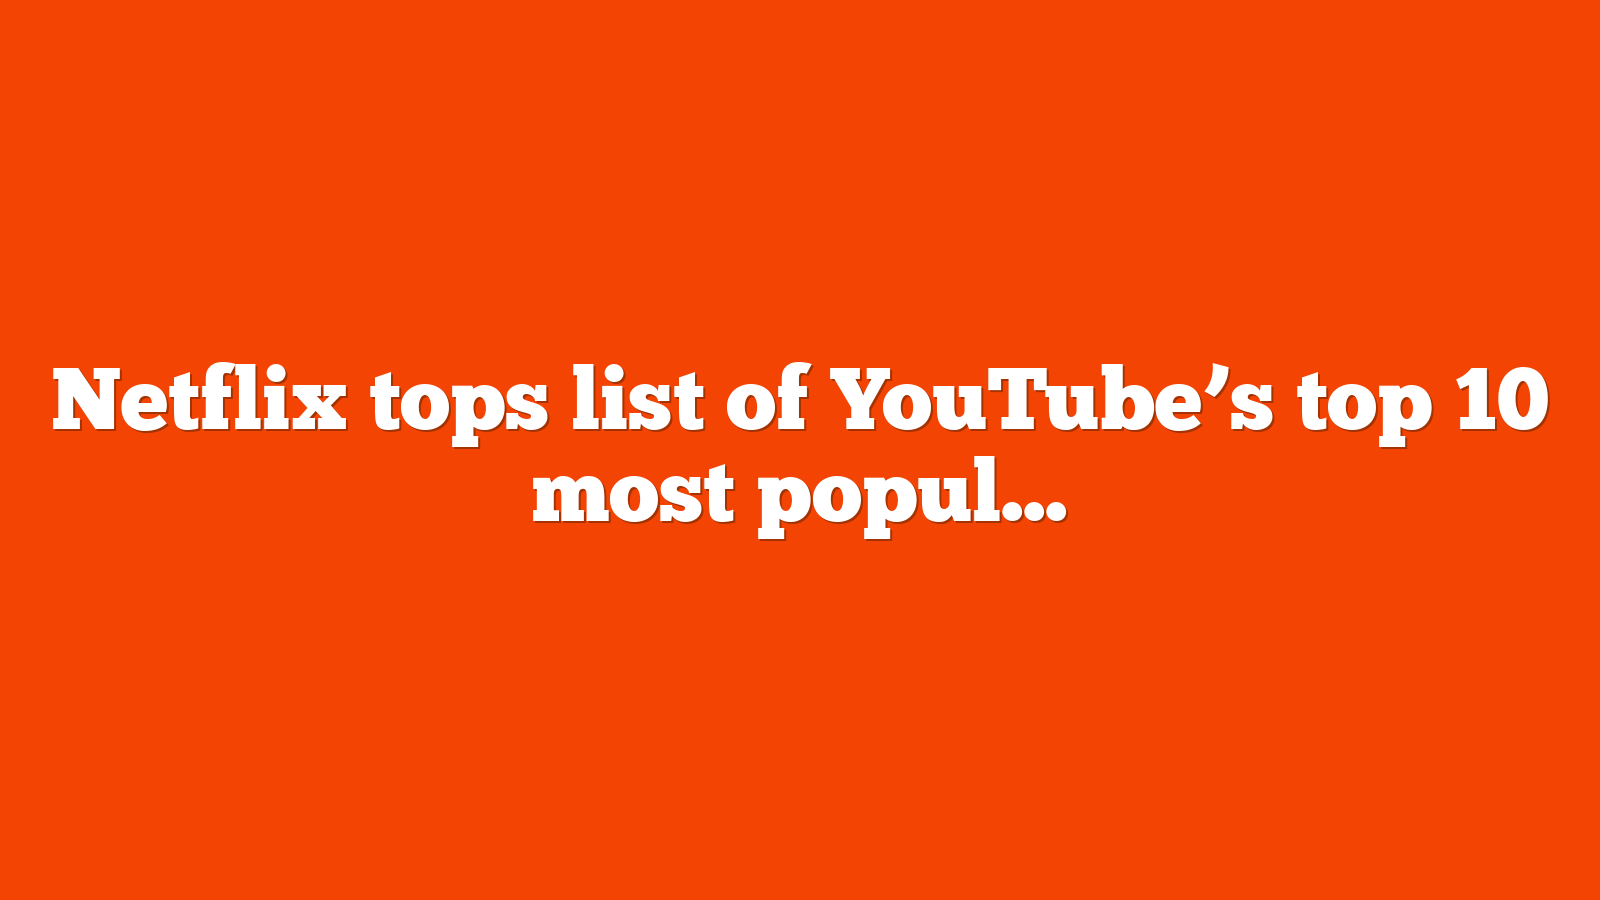 Netflix tops list of YouTube’s top 10 most popular video ads